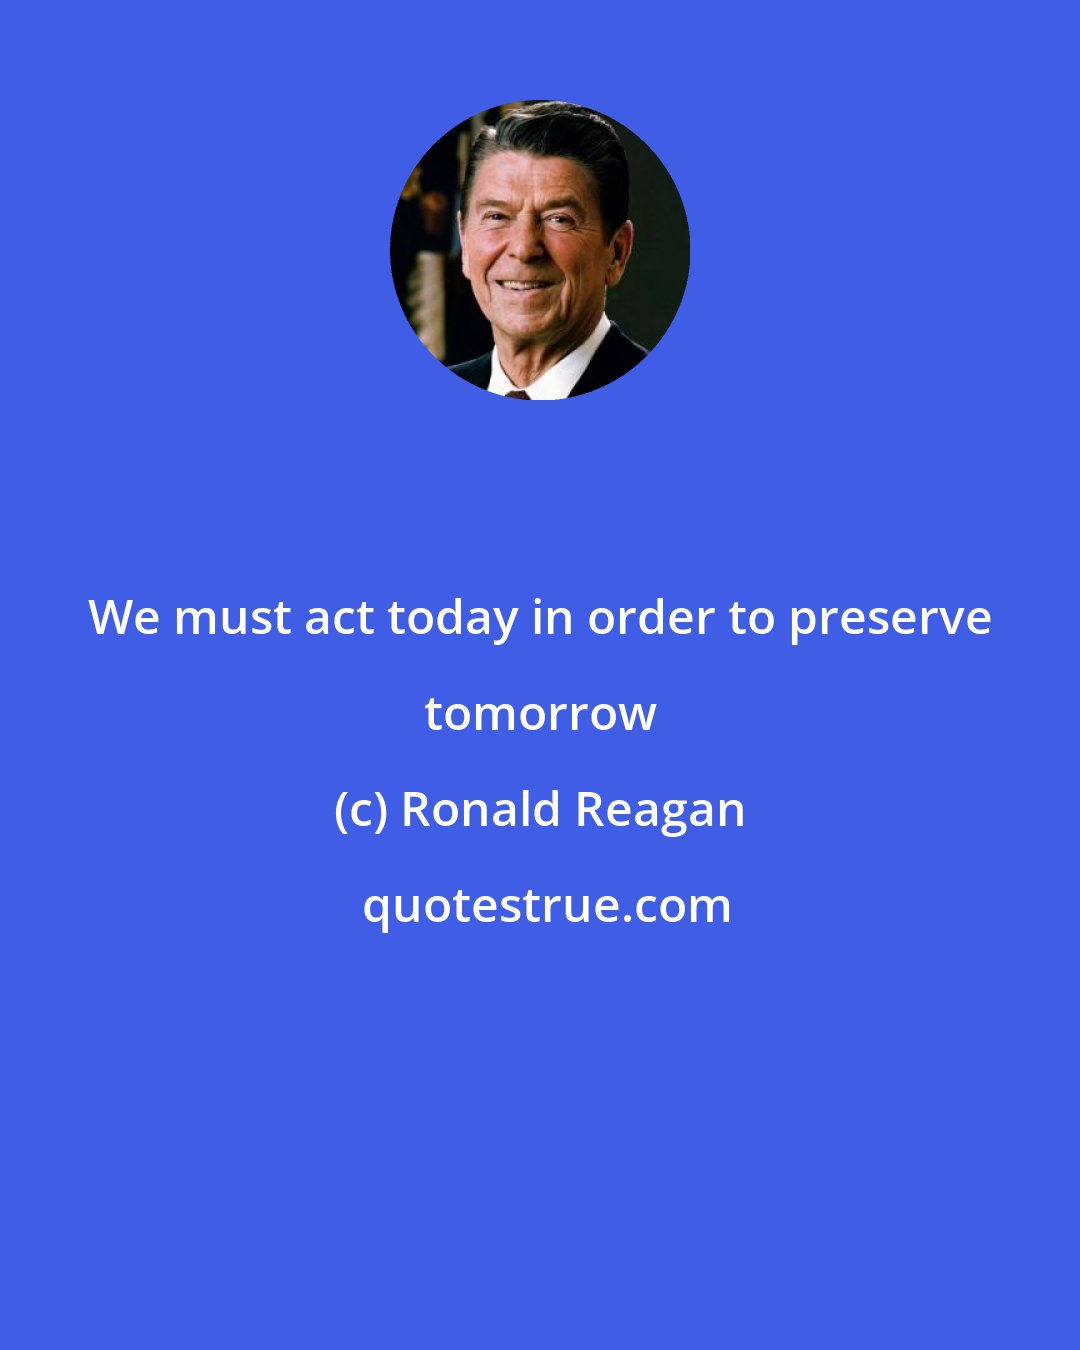 Ronald Reagan: We must act today in order to preserve tomorrow